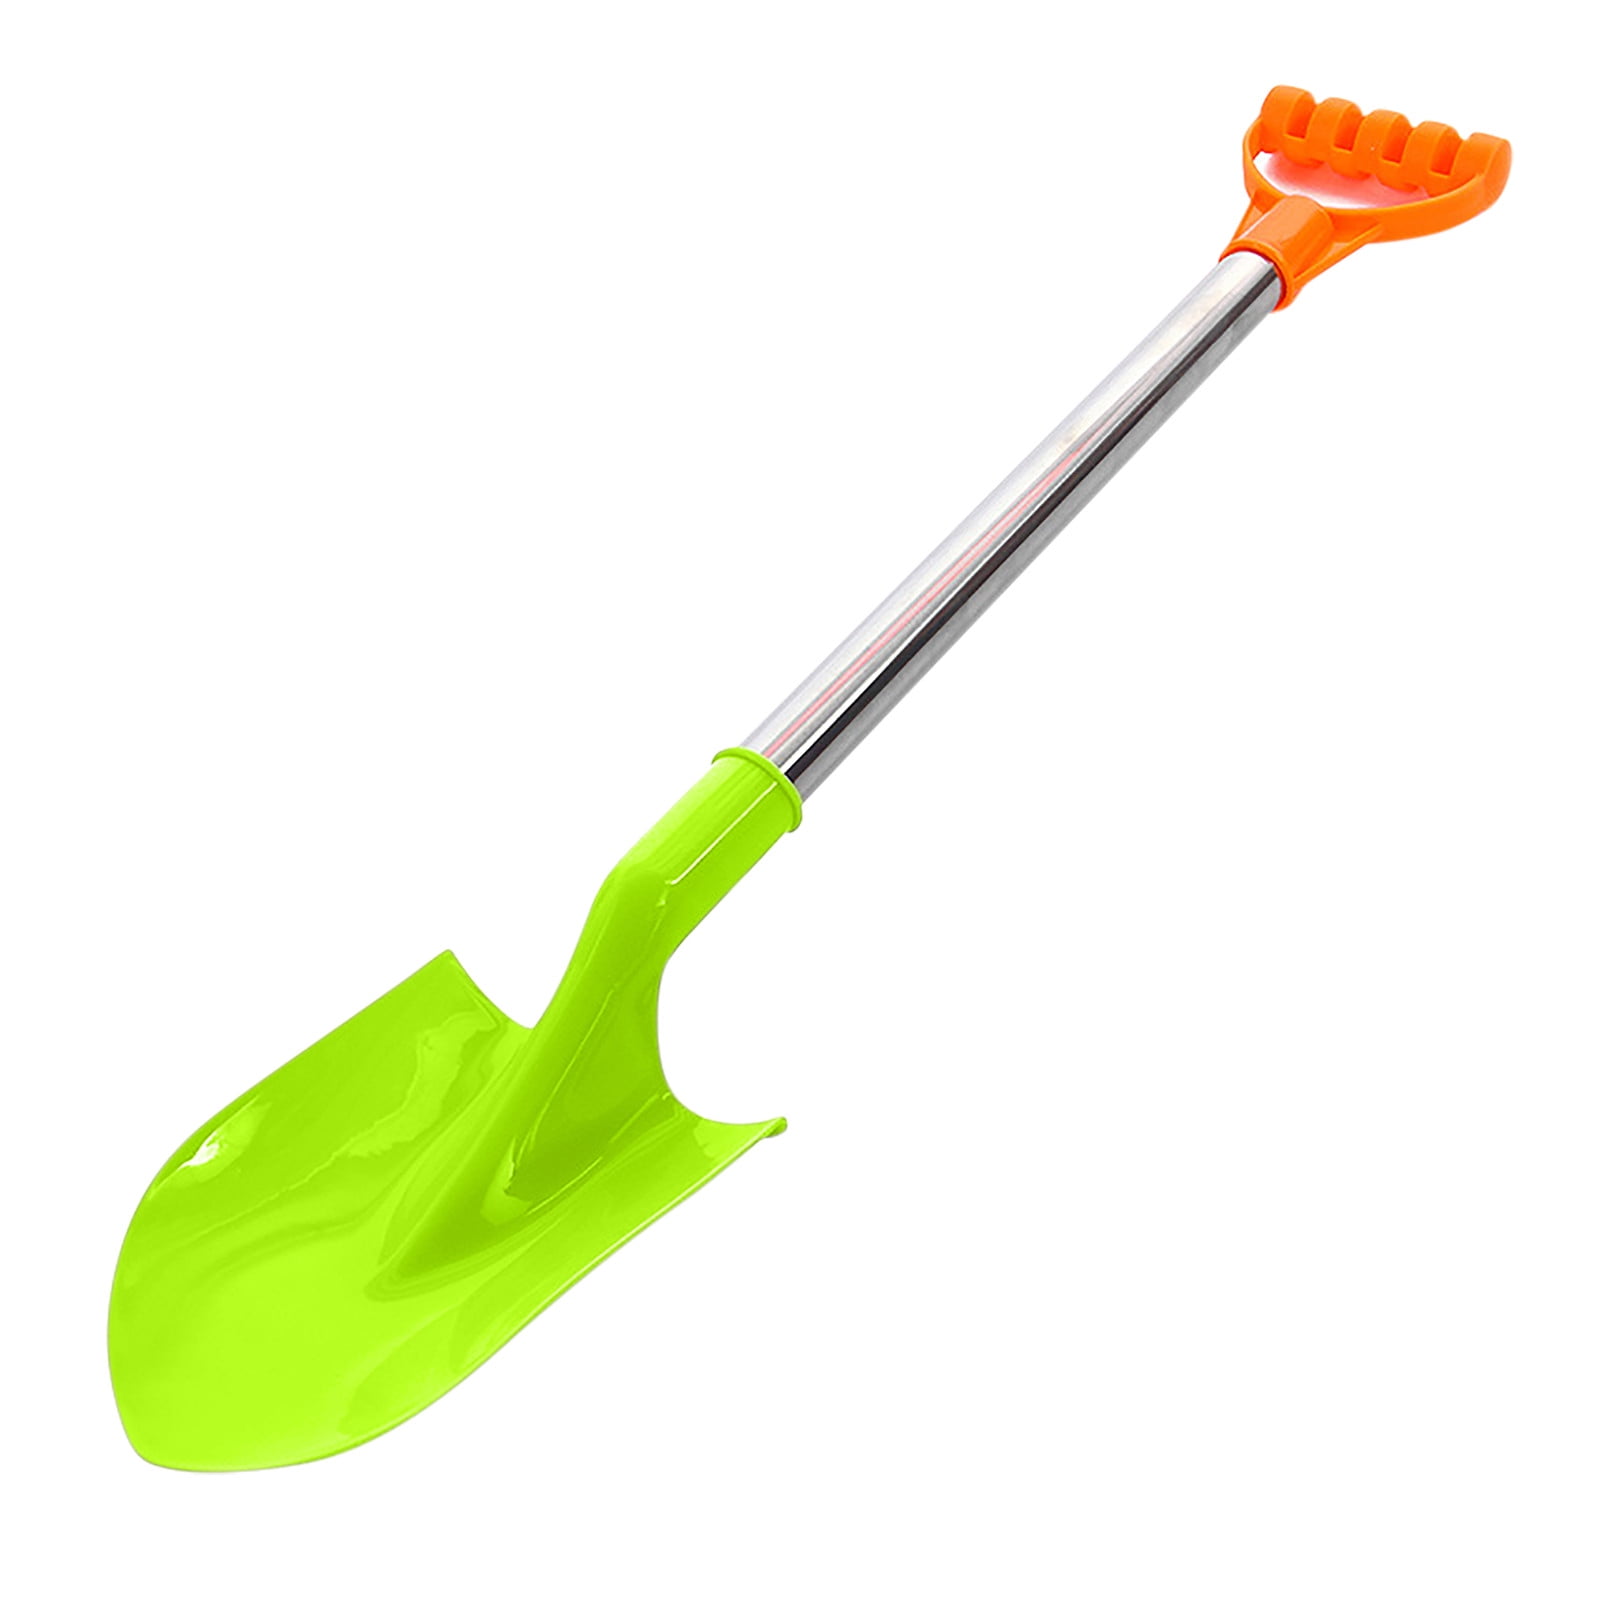 Childrens Snow Shovel 18-Inch Perfect Sized Snow Shovel for Kids,Plastic Spade and Stainless Steel Handle,Childrens Poly Snow Shovel,for Summer Outdoors Party Bundle 18inch Blue 